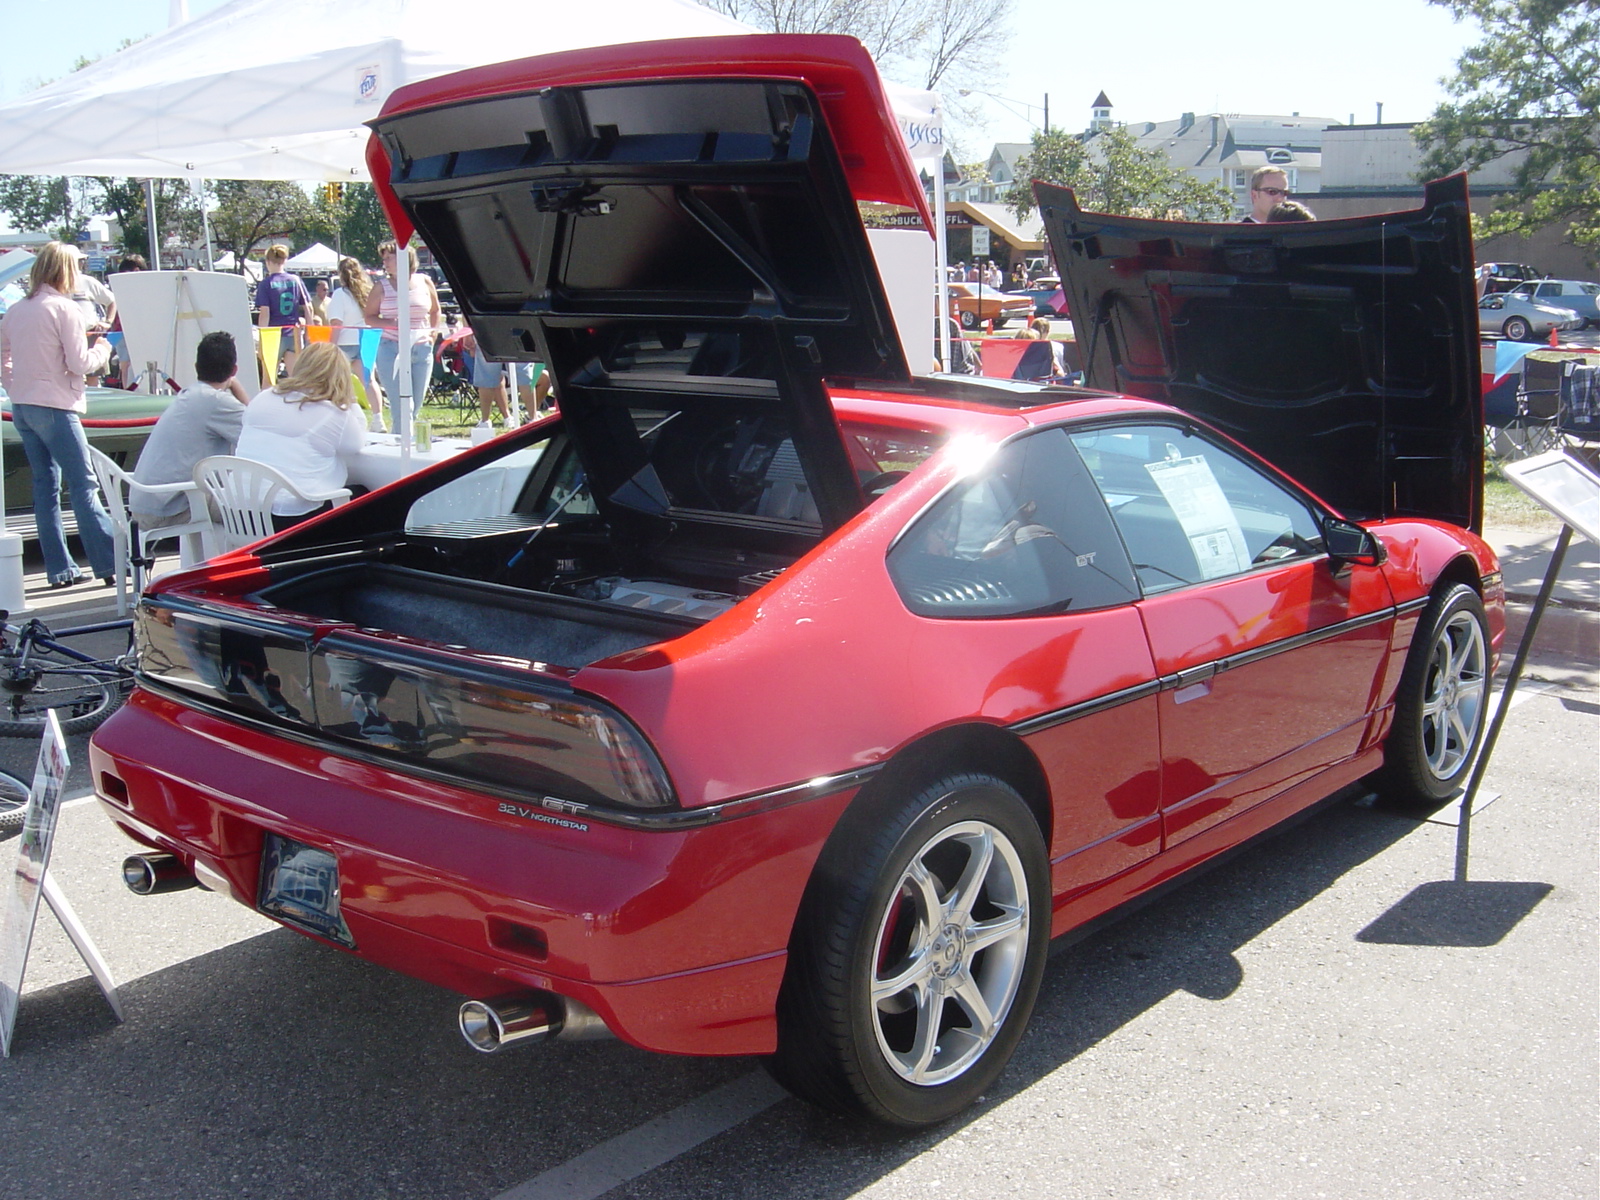 Northstar Fiero Stalemate: Two Pontiacs, Two Northstar Engines, Two Spicy  Builds